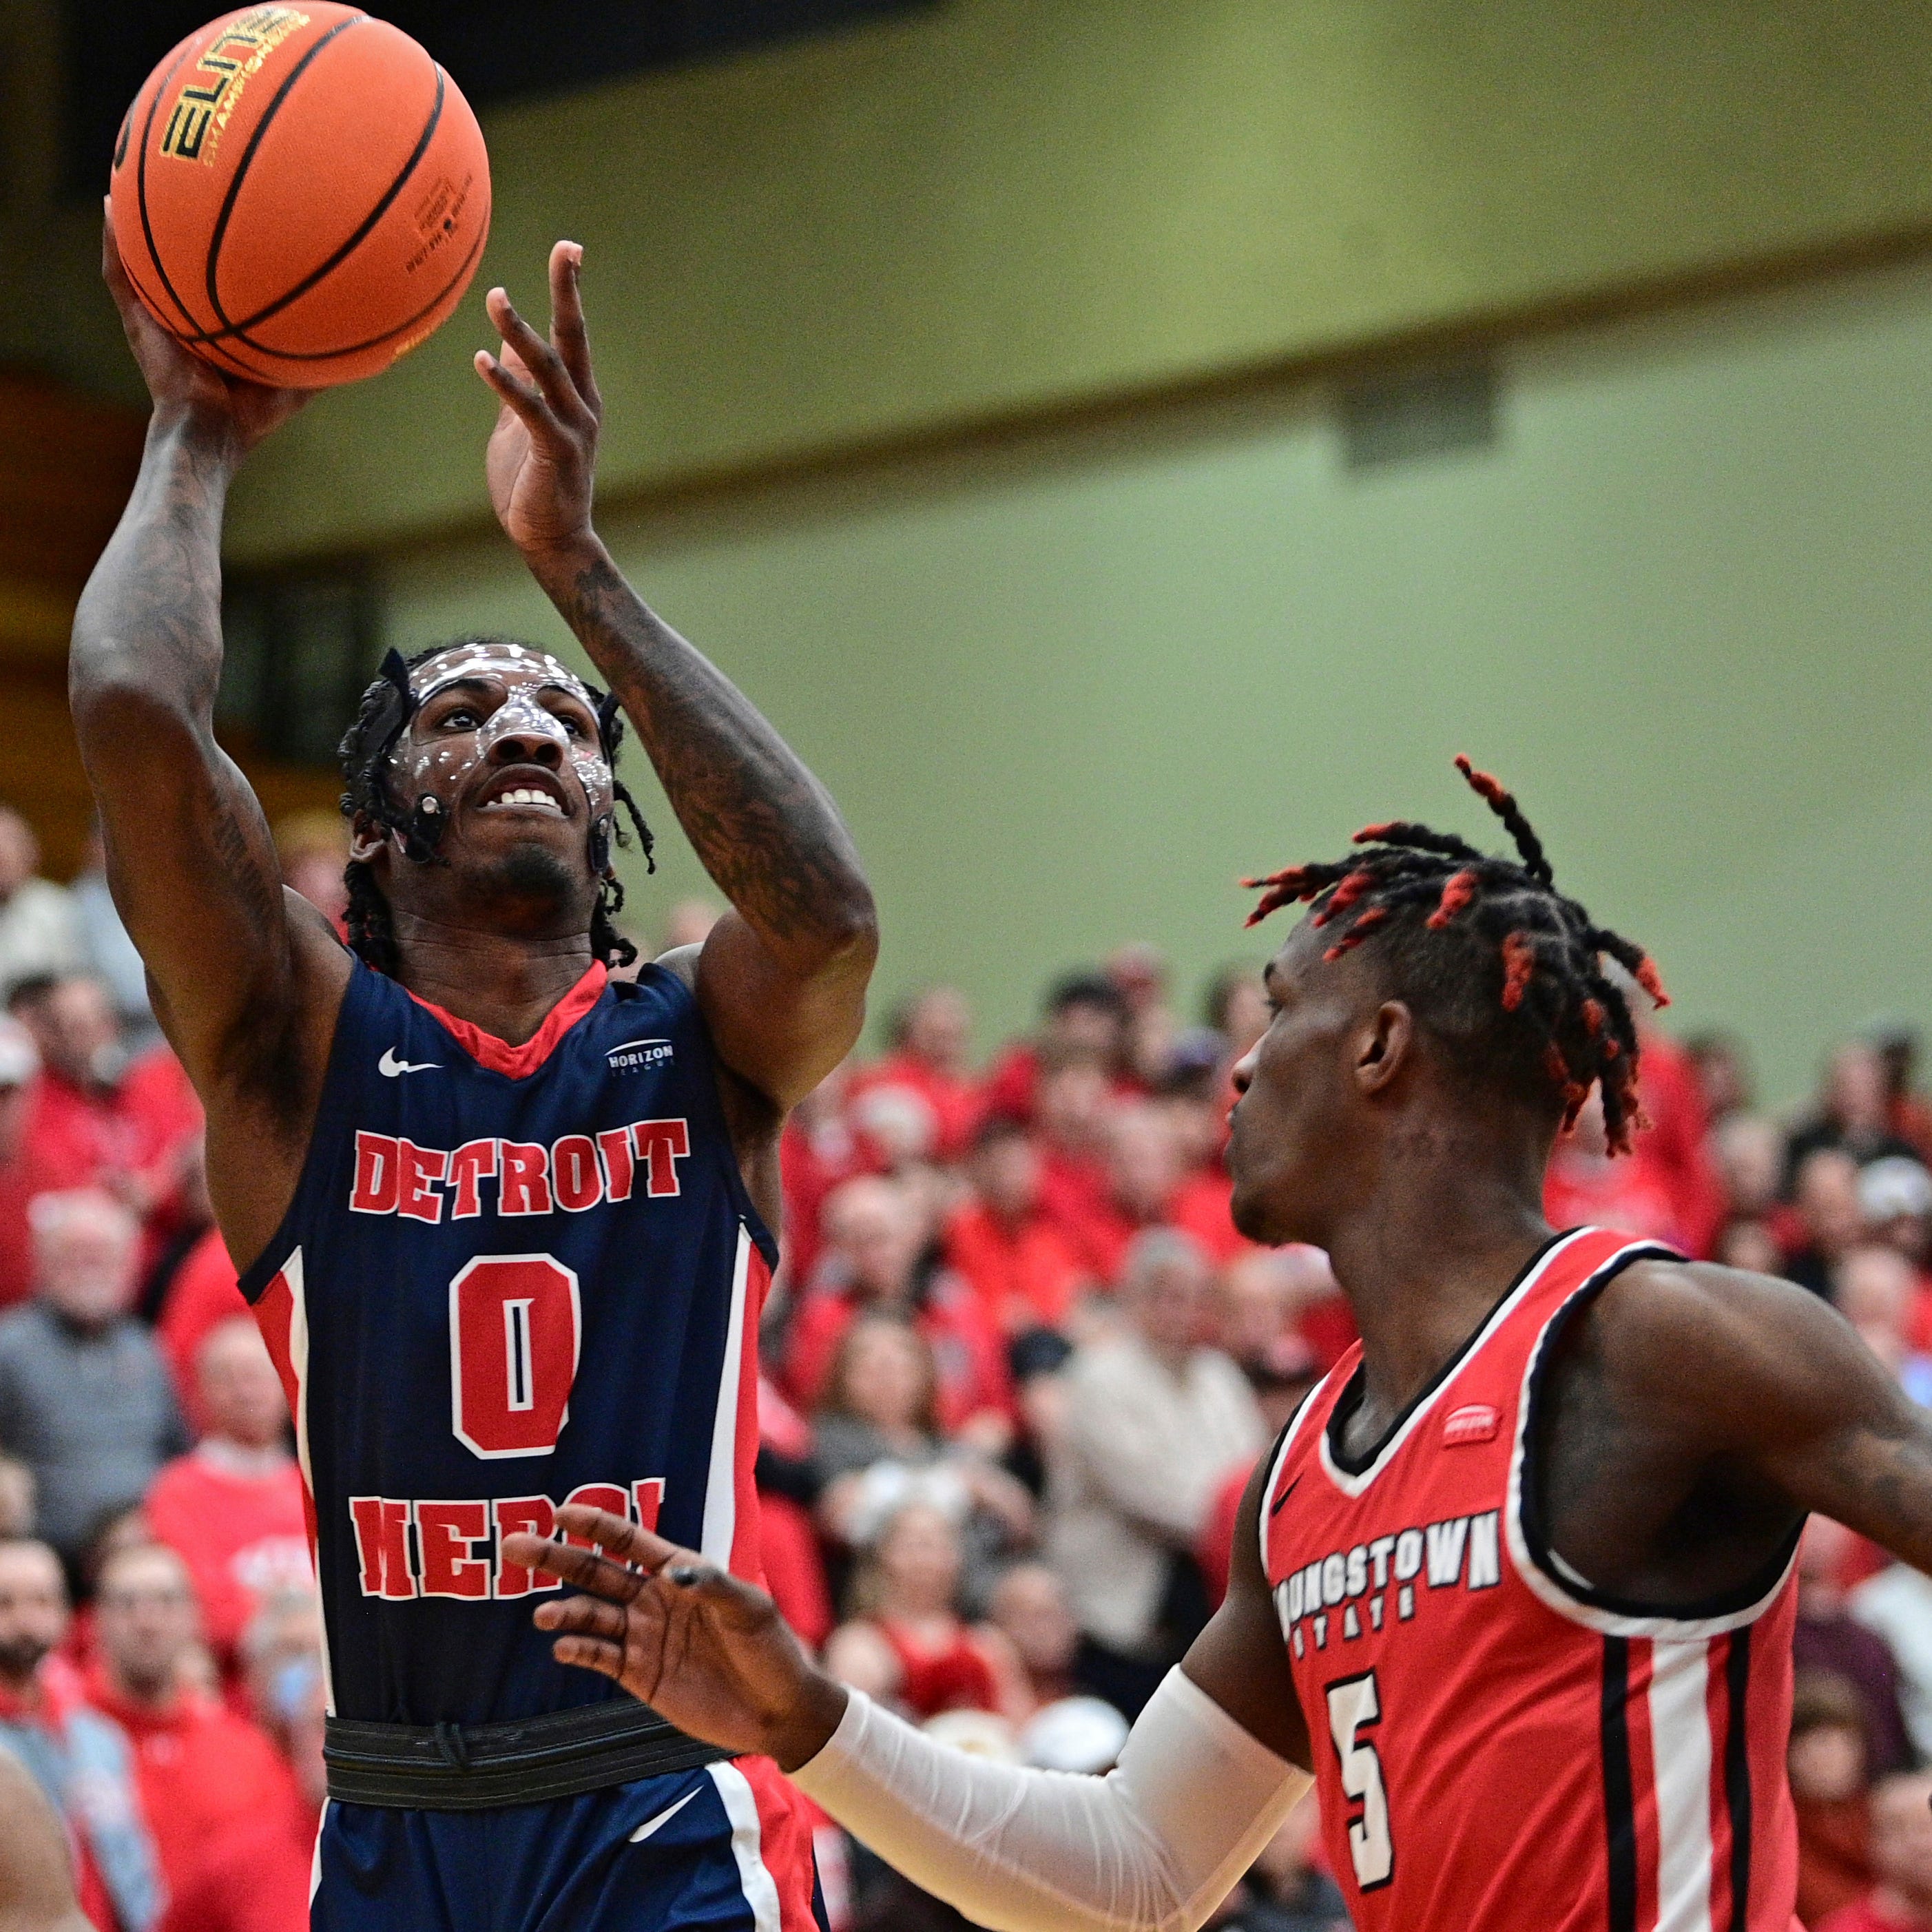 Detroit Mercy's Antoine Davis shoots against Youngstown State during the quarterfinals of the Horizon League tournament.OHDD102